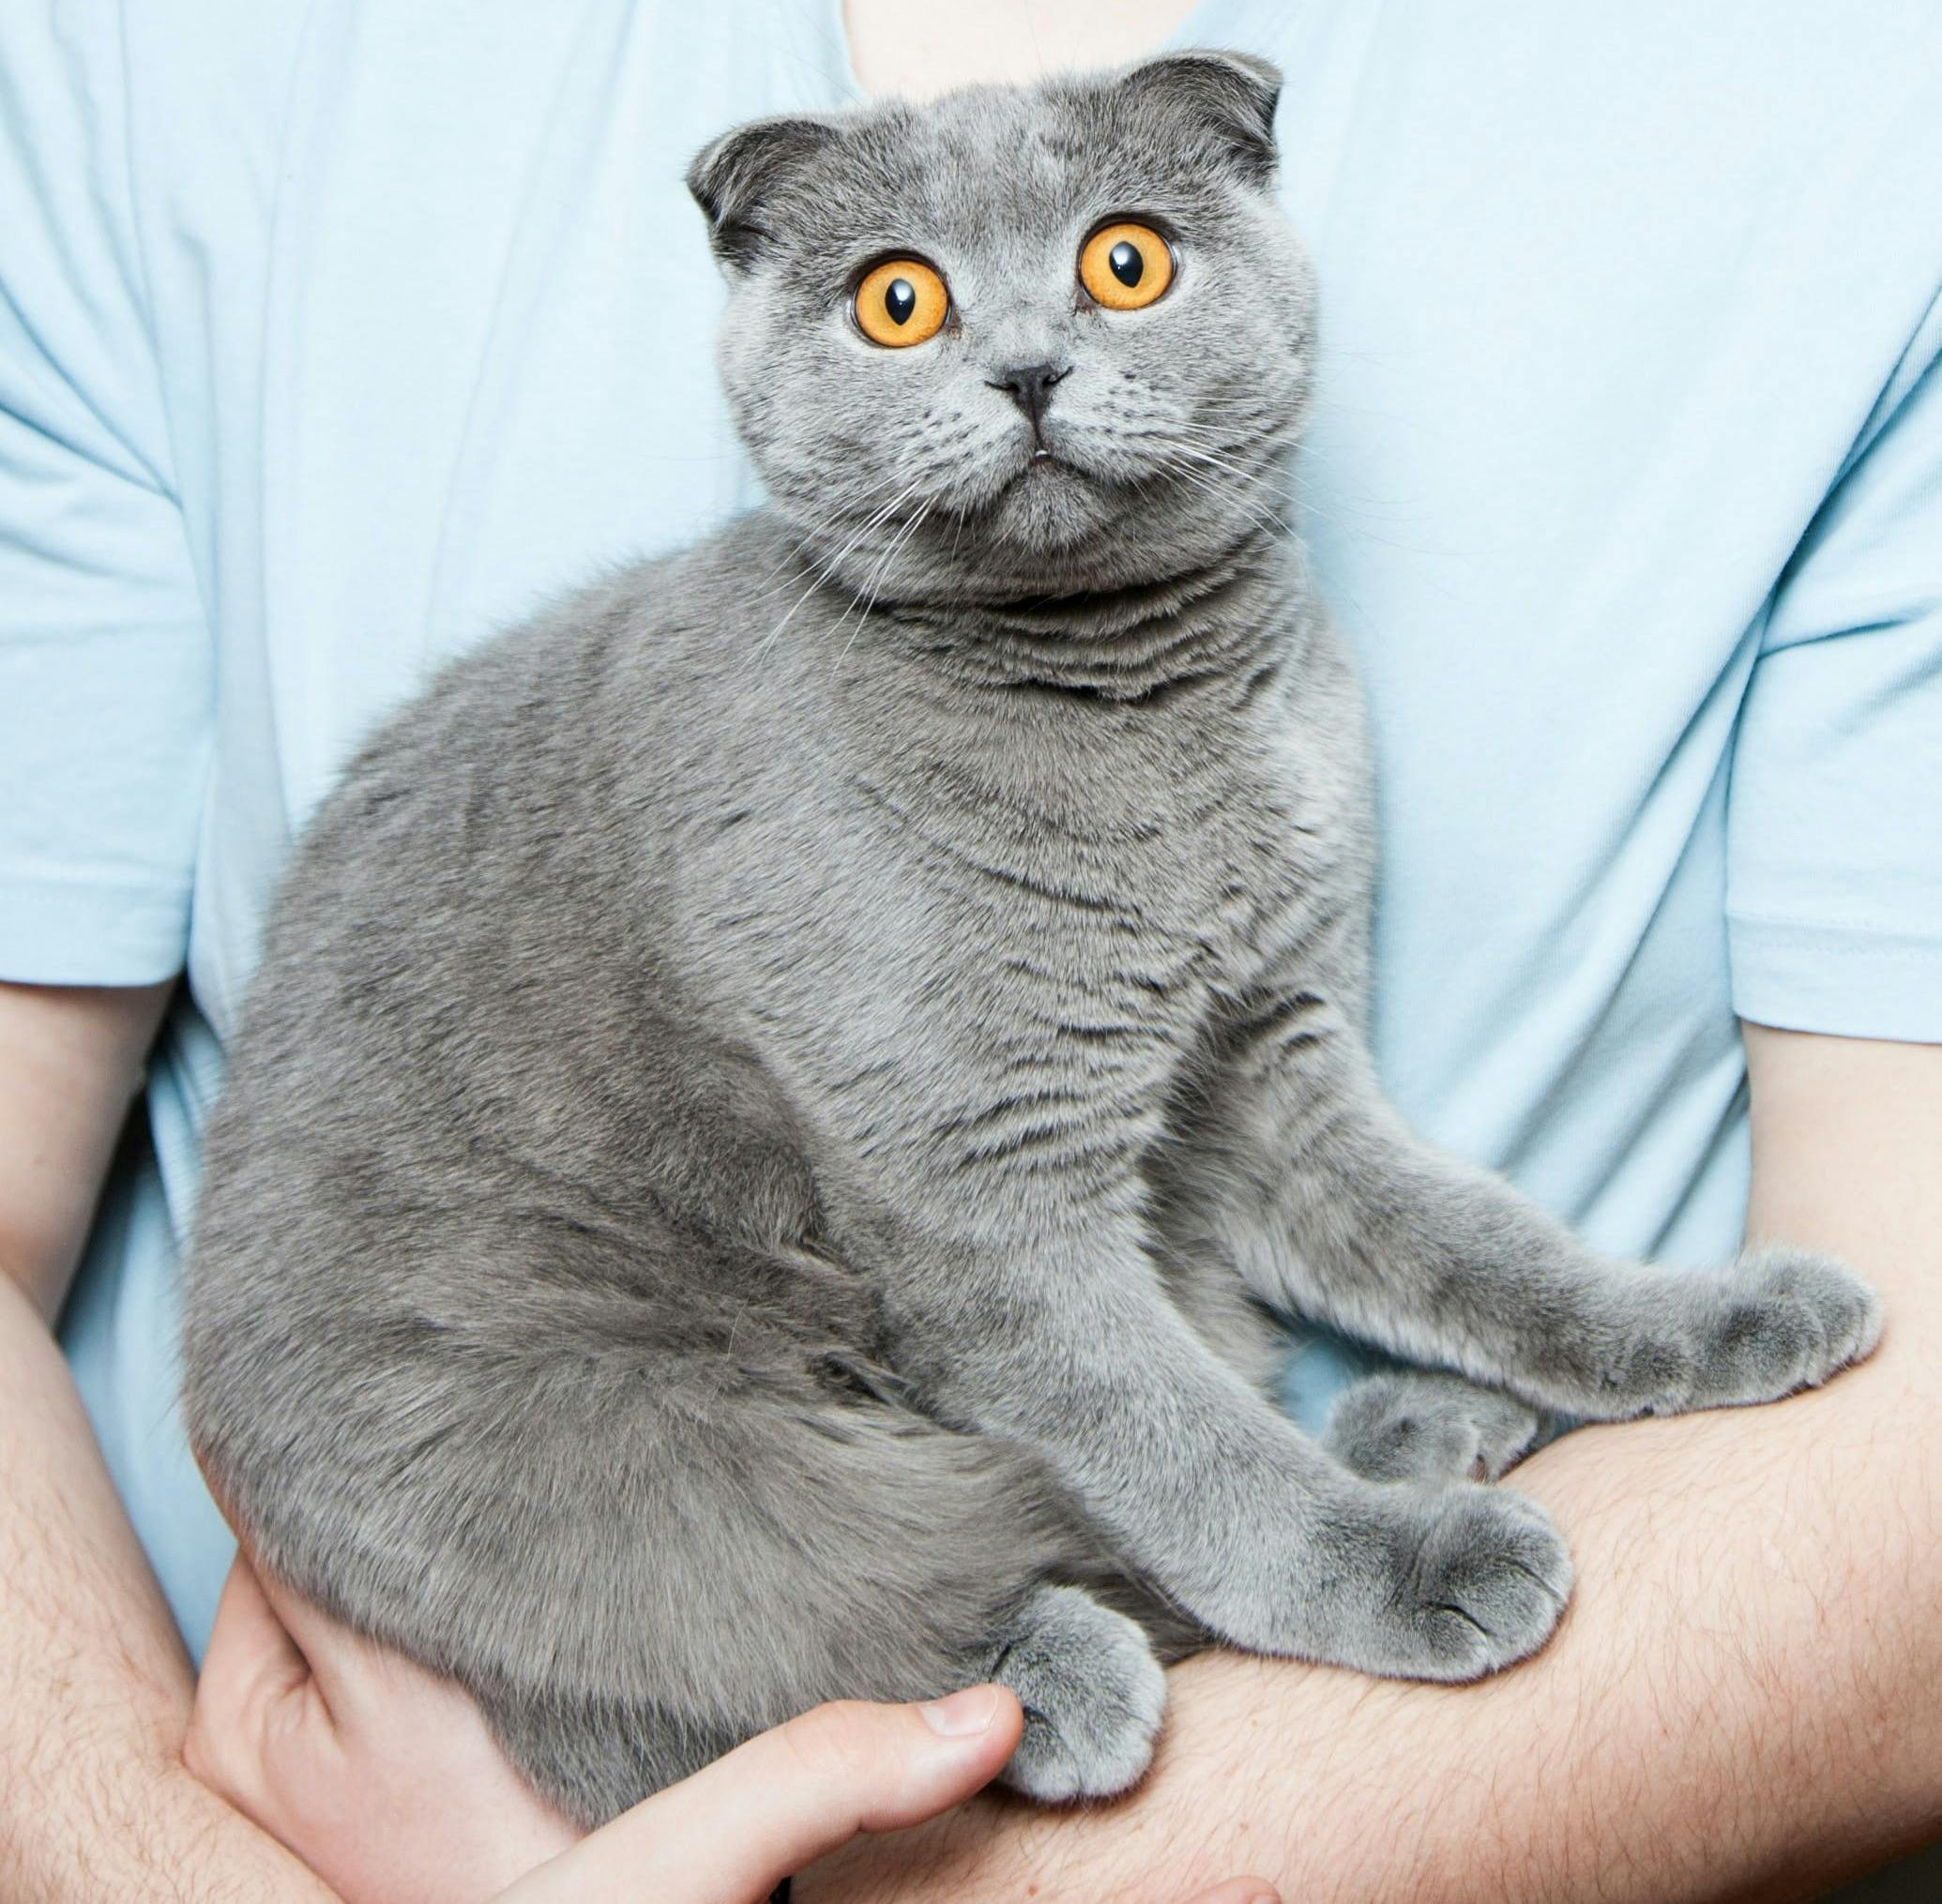 A cute gray fluffy cat with yellow eyes... the cat is scared with wide eyes and downturned ears.